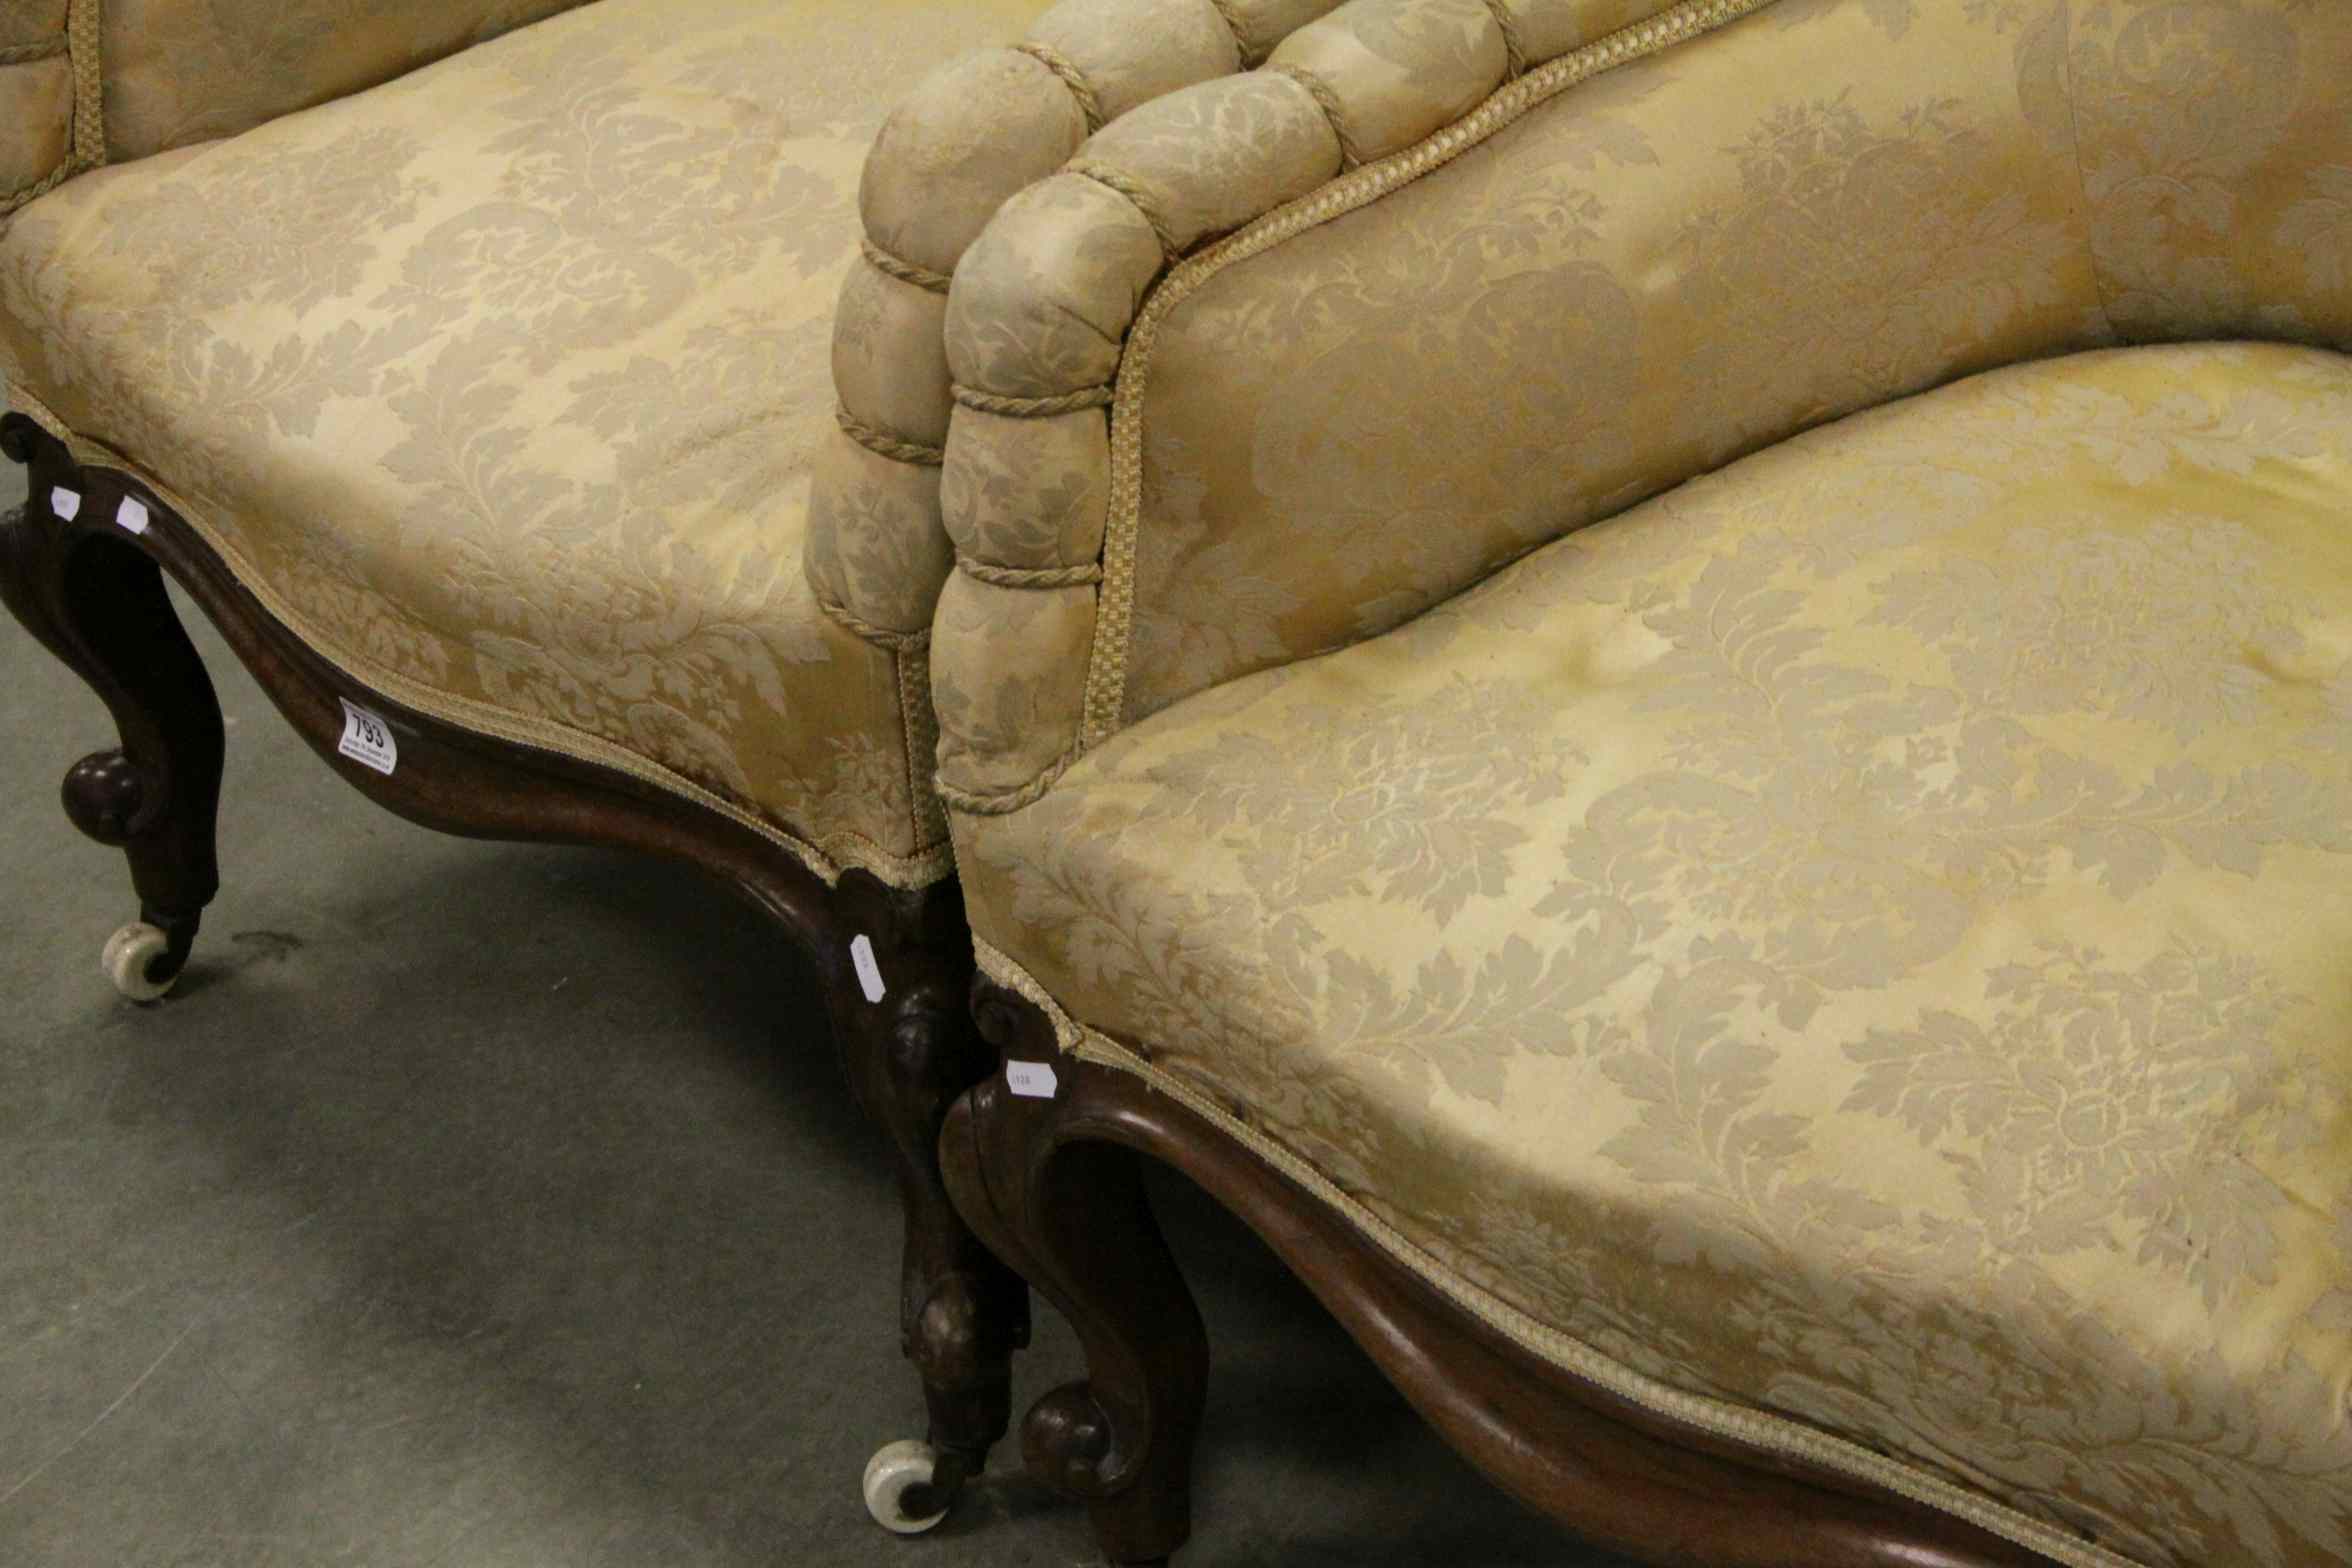 Pair of 19th century Mahogany Framed Tub Armchairs upholstered in matching yellow mustard fabric, - Image 4 of 4